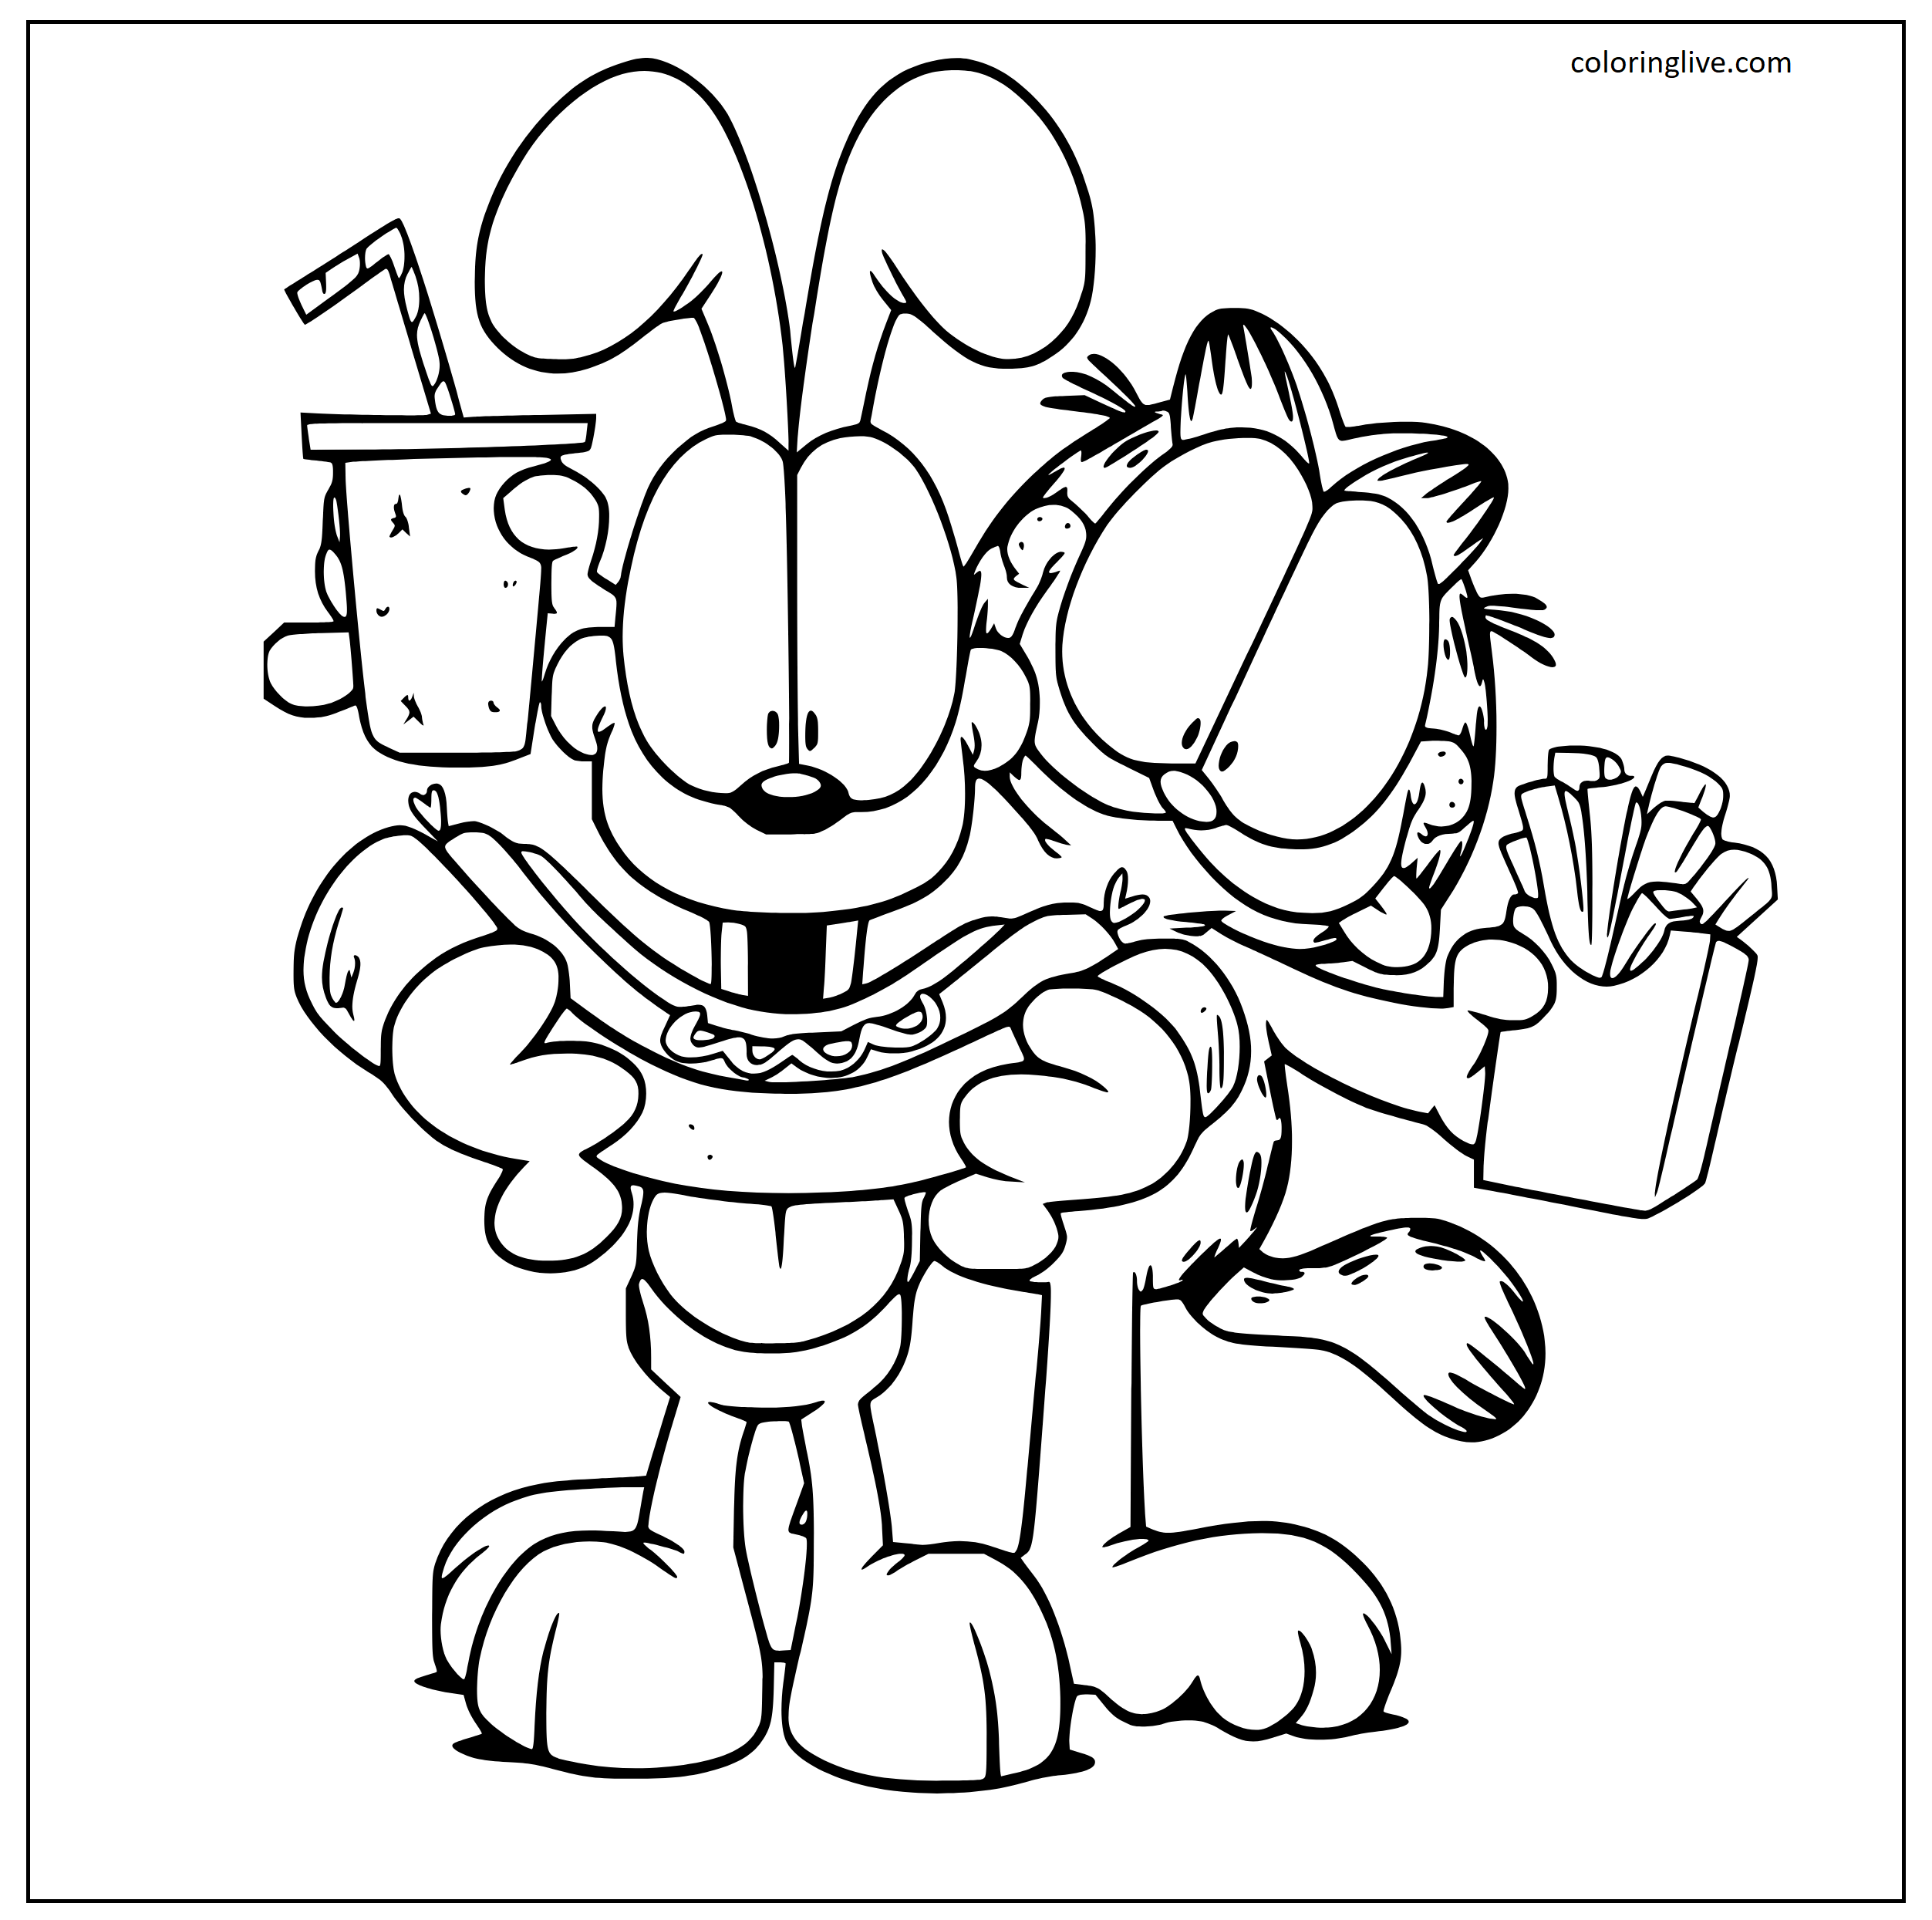 Printable Odie and Garfield eating hotdog Coloring Page for kids.